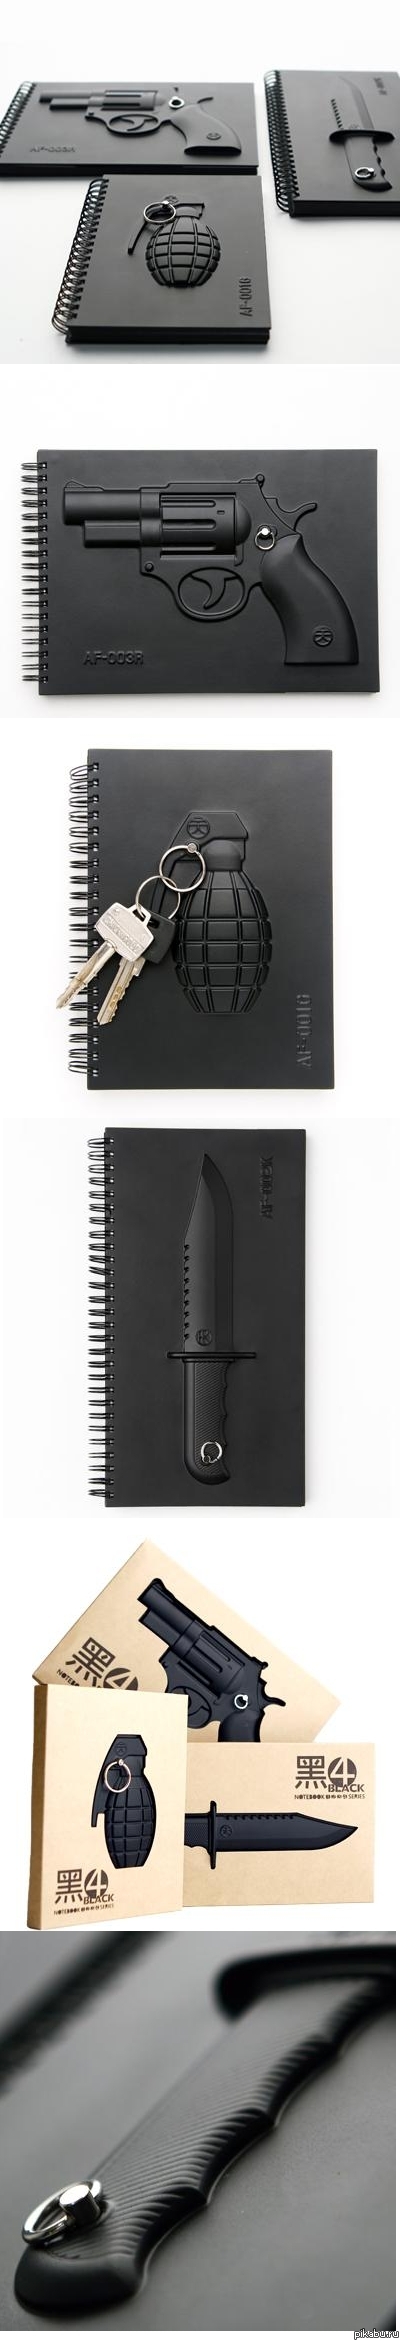 Armed Notebook 